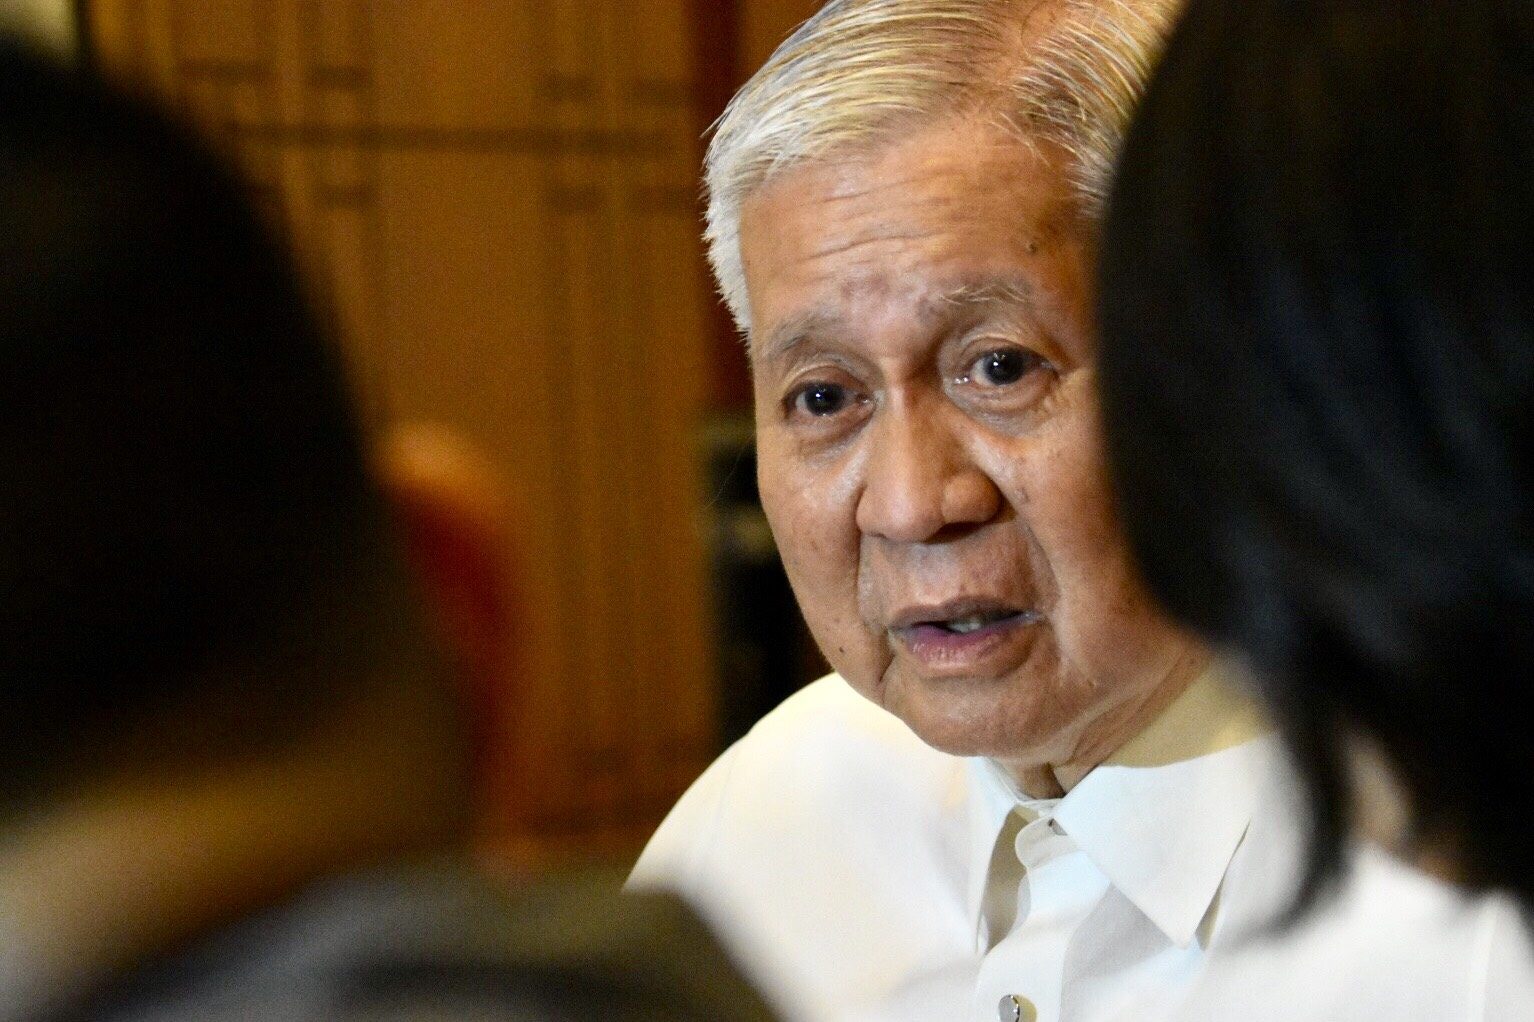 Del Rosario lauds summoning of Chinese envoy over ships in West PH Sea